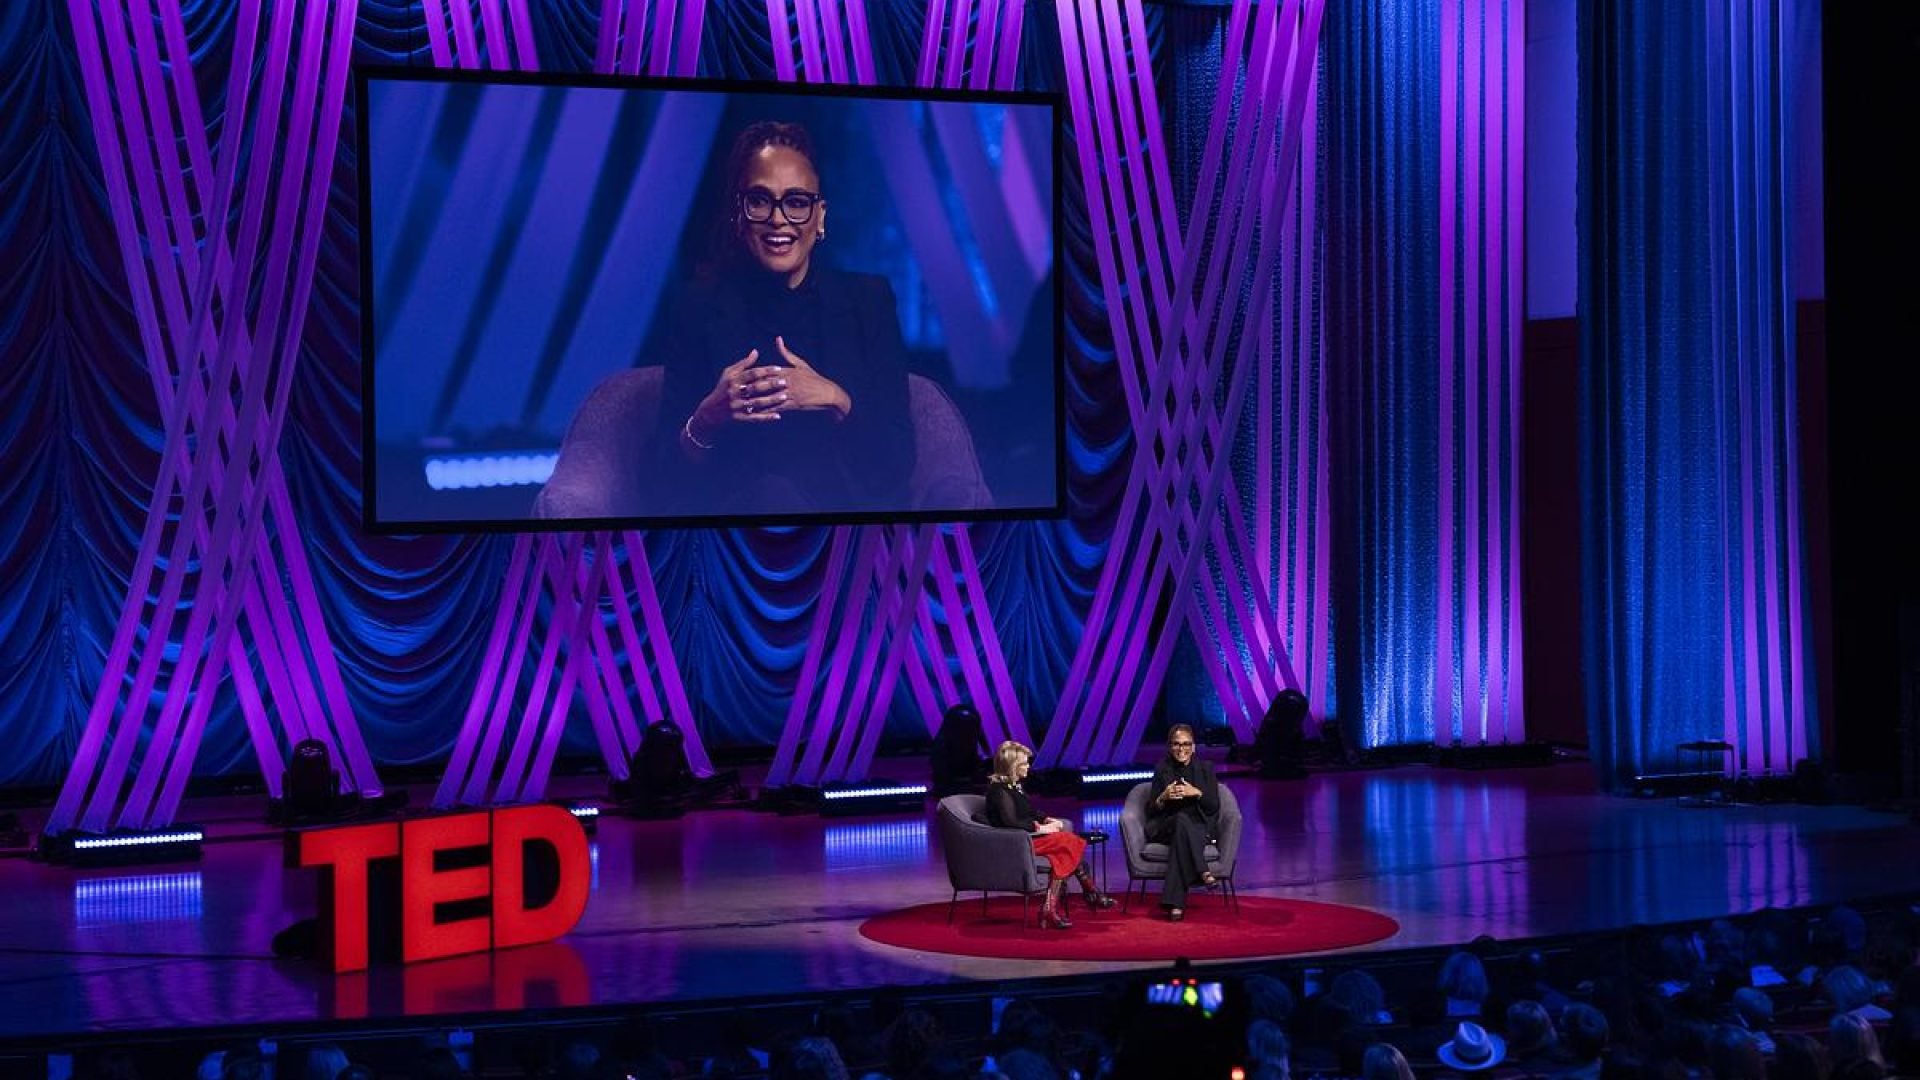 Ava DuVernay Offered This Gem About Finding Liberation In Order To Thrive At Her TEDWomen Talk In Atlanta